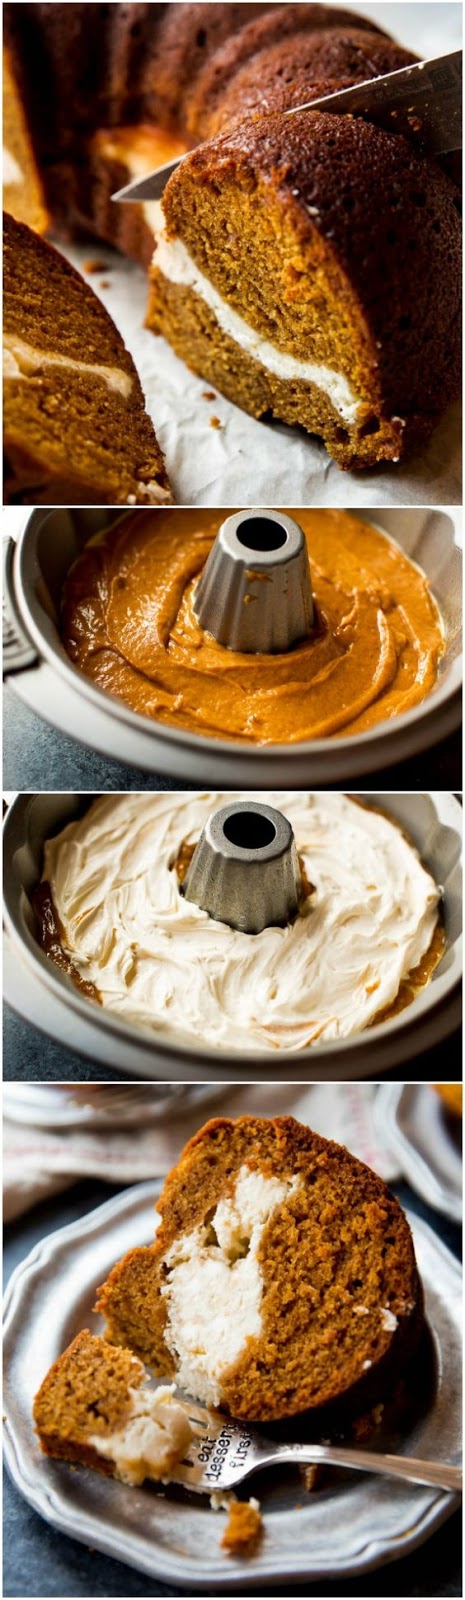 You have to try this pumpkin cream cheese bundt cake recipe! Both layers are irresistible and it's so easy! Recipe on sallysbakingaddiction.com